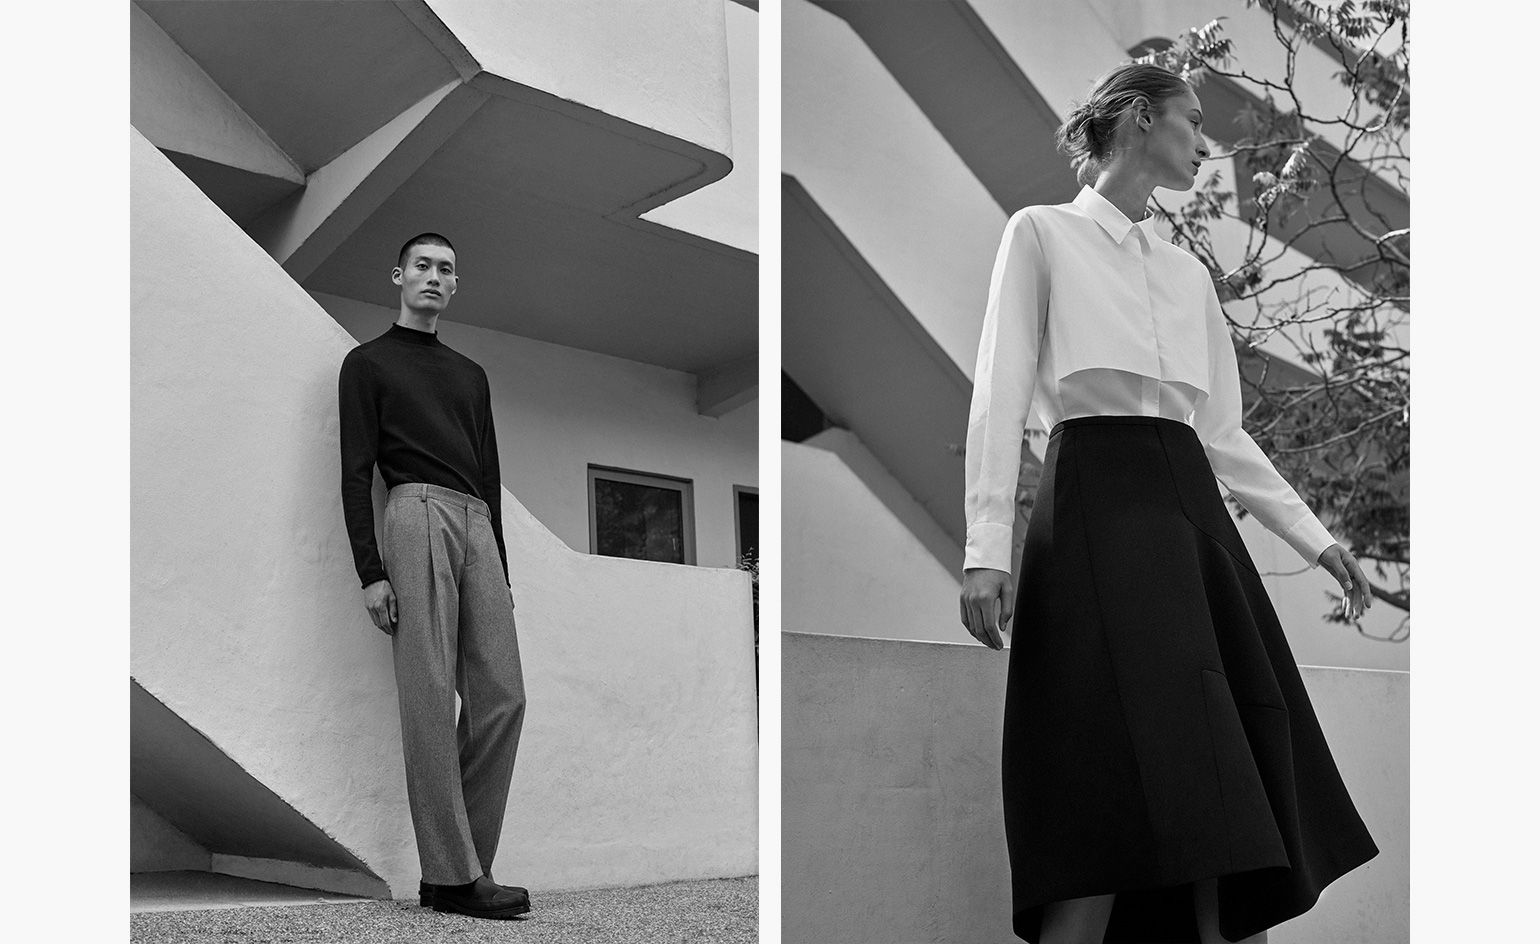 COS launches Bauhaus-inspired capsule collection | Wallpaper